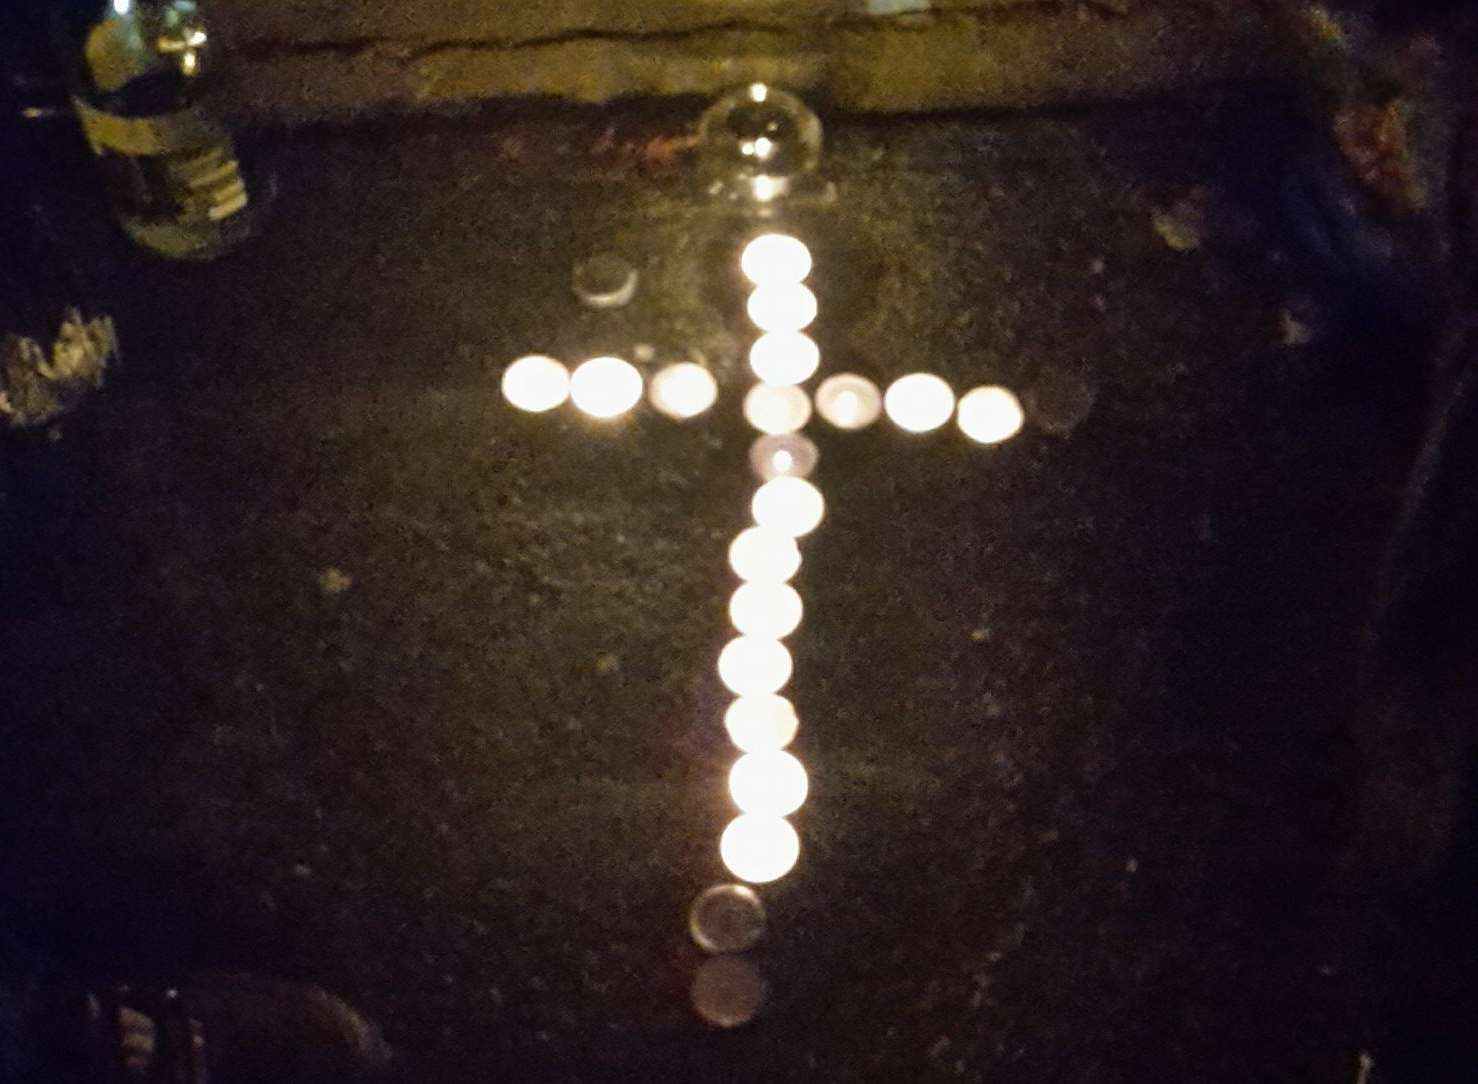 Volunteer group One Big Family held a candlelit vigil after two homeless men died in Chatham town centre